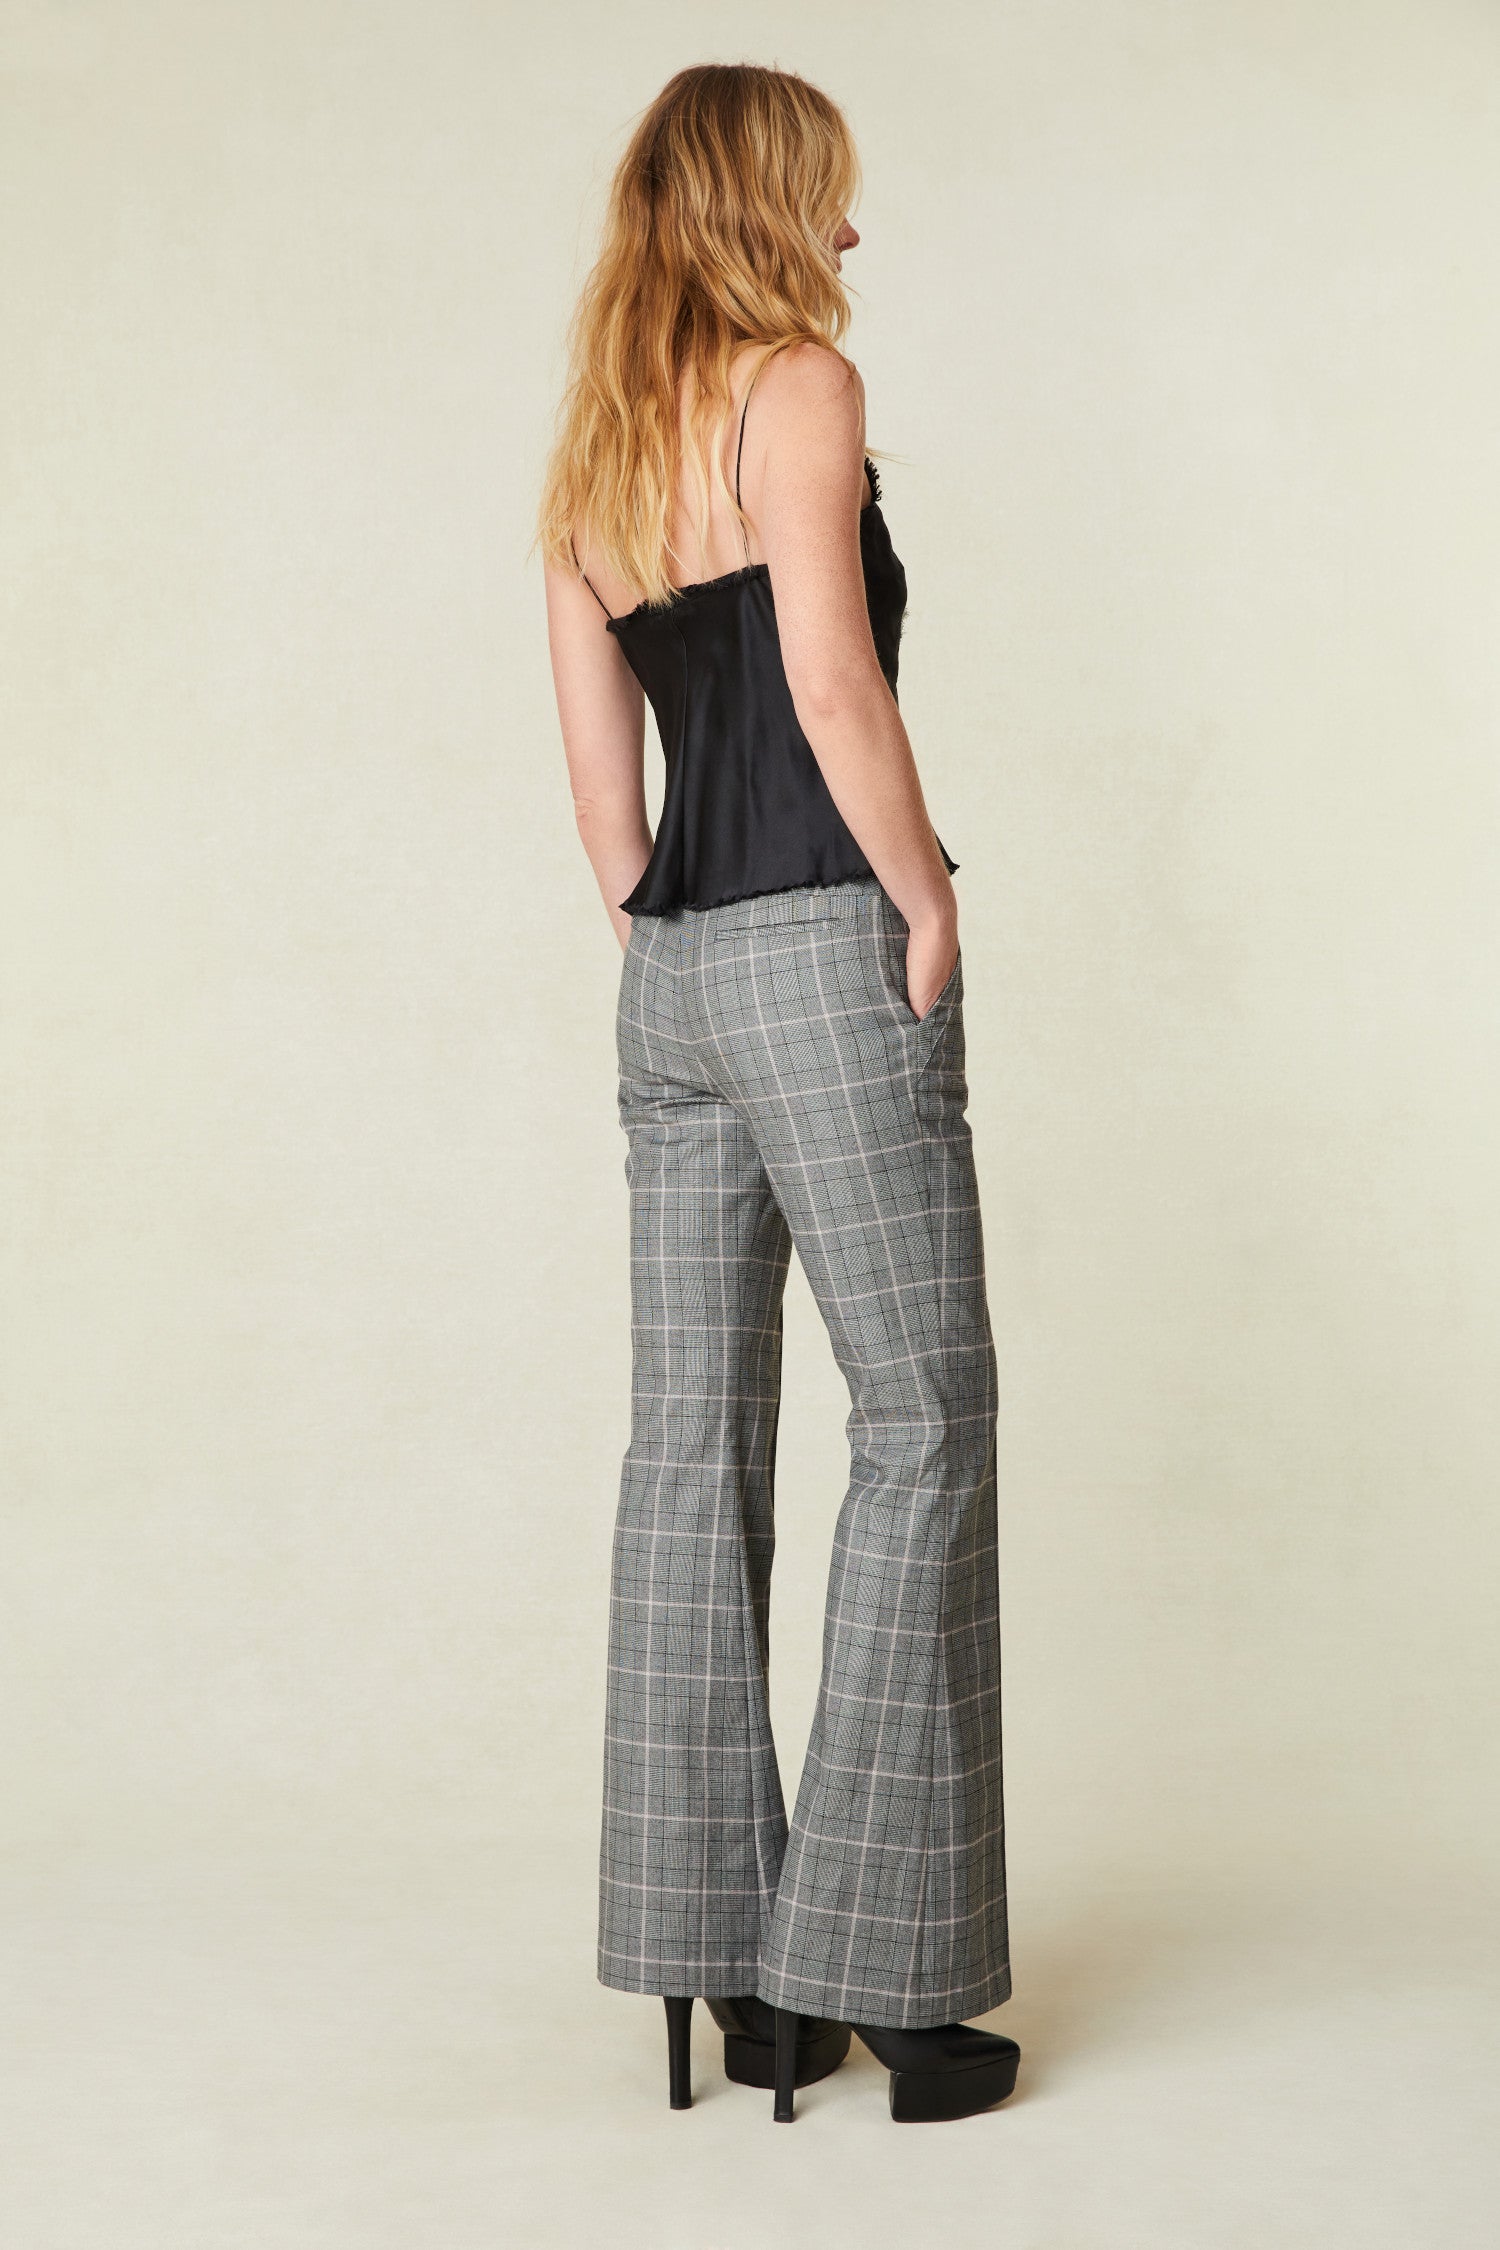 low rise, plaid pants have a flare fit and feature tabs on each side with enameled buttons, a pintuck detail going down center front, a pocket in the back, top stitch pockets on the front, and a fly zipper with hook and bar closure.  